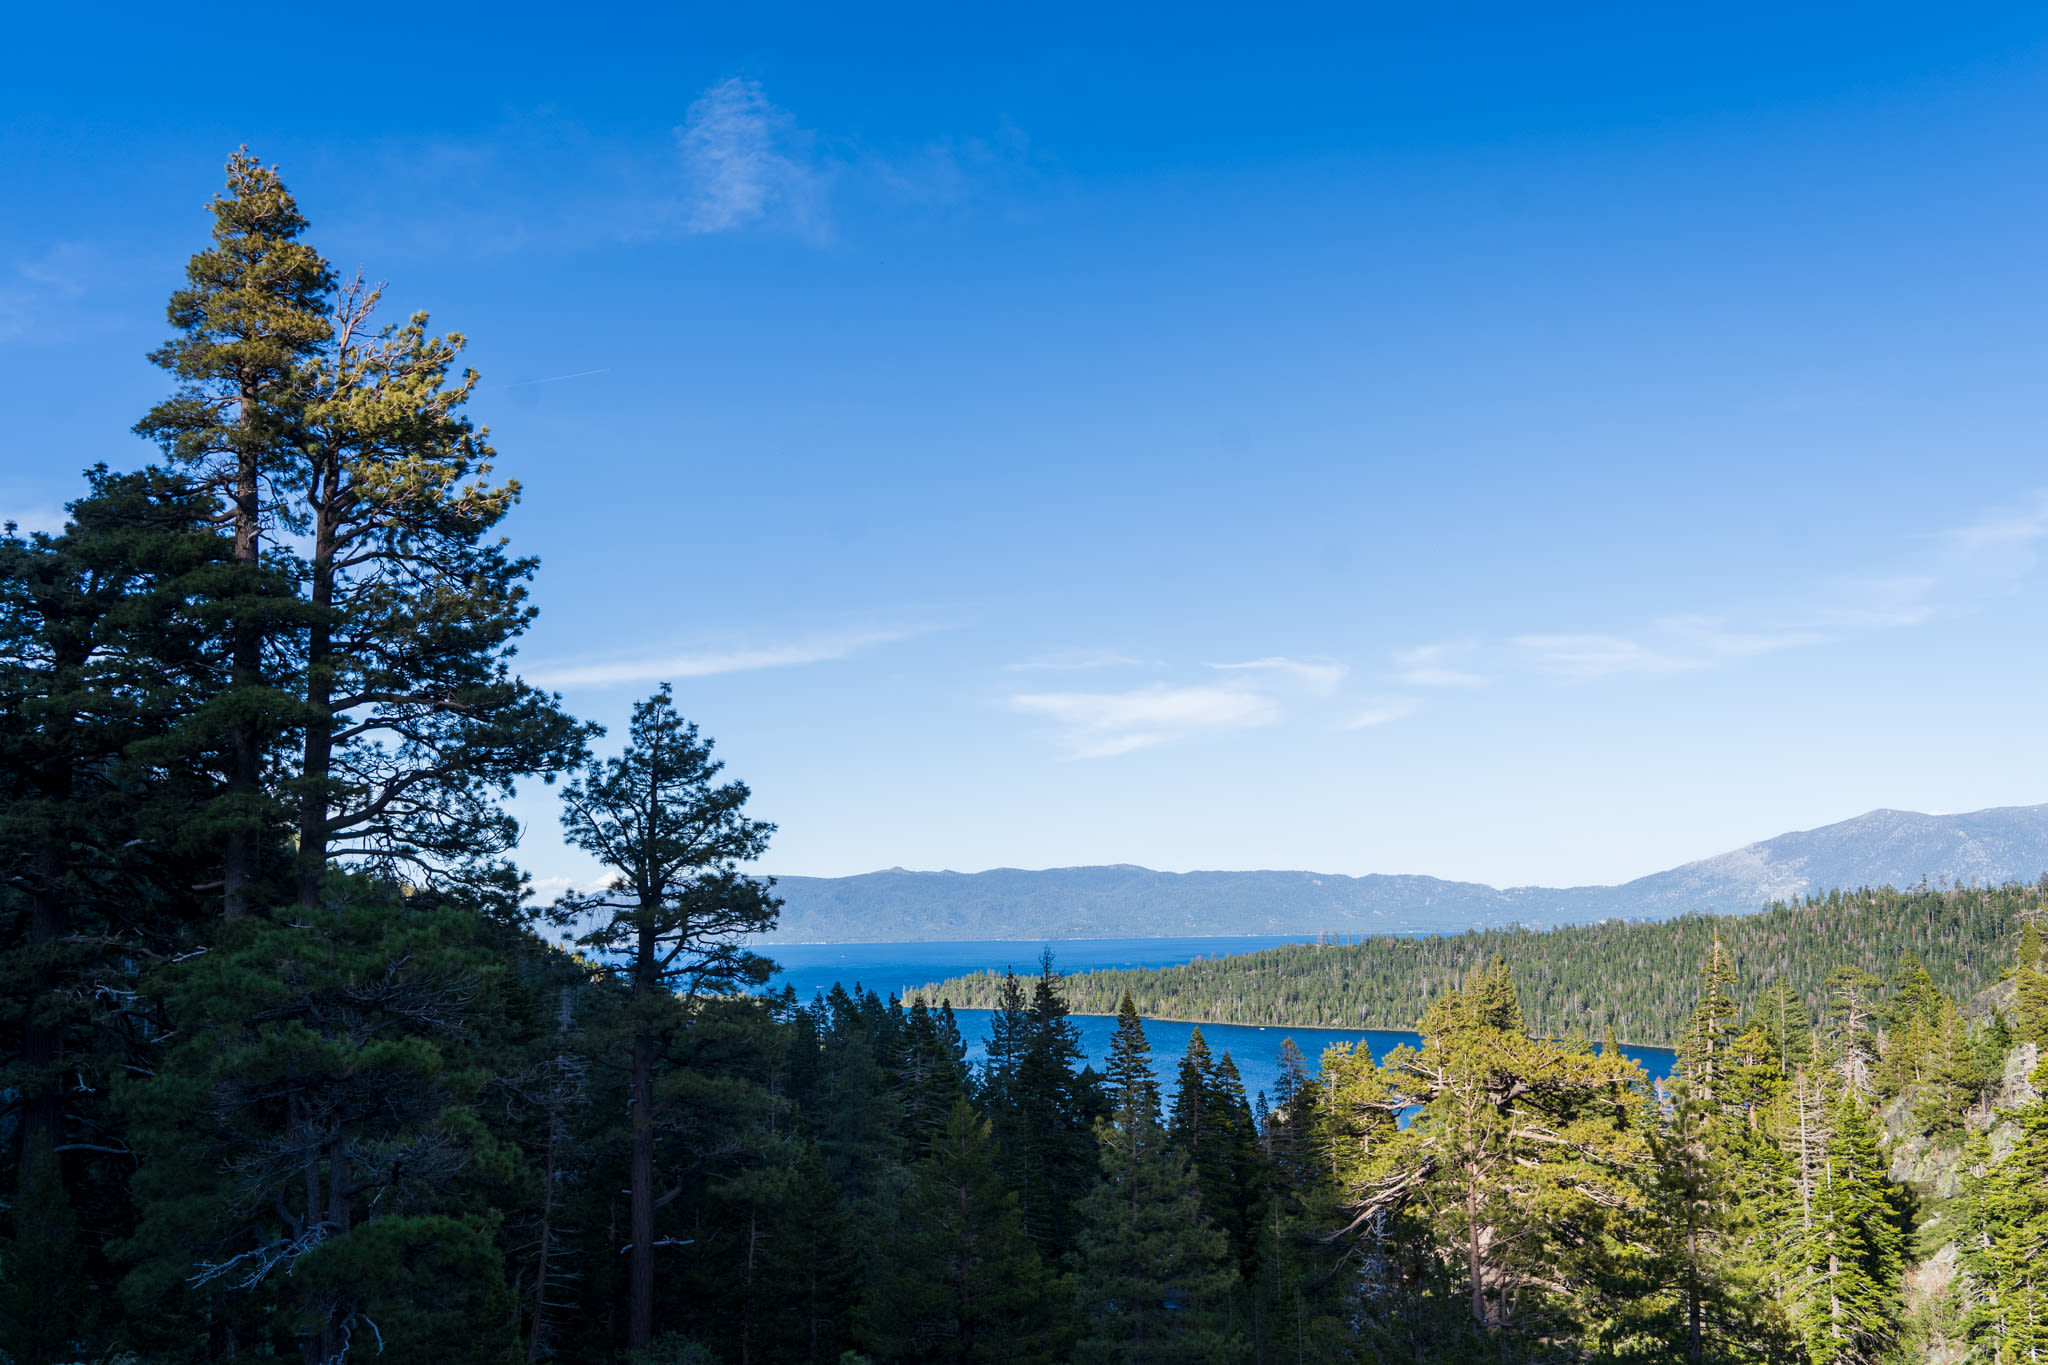 June is the best month to be in Tahoe. Here's why.